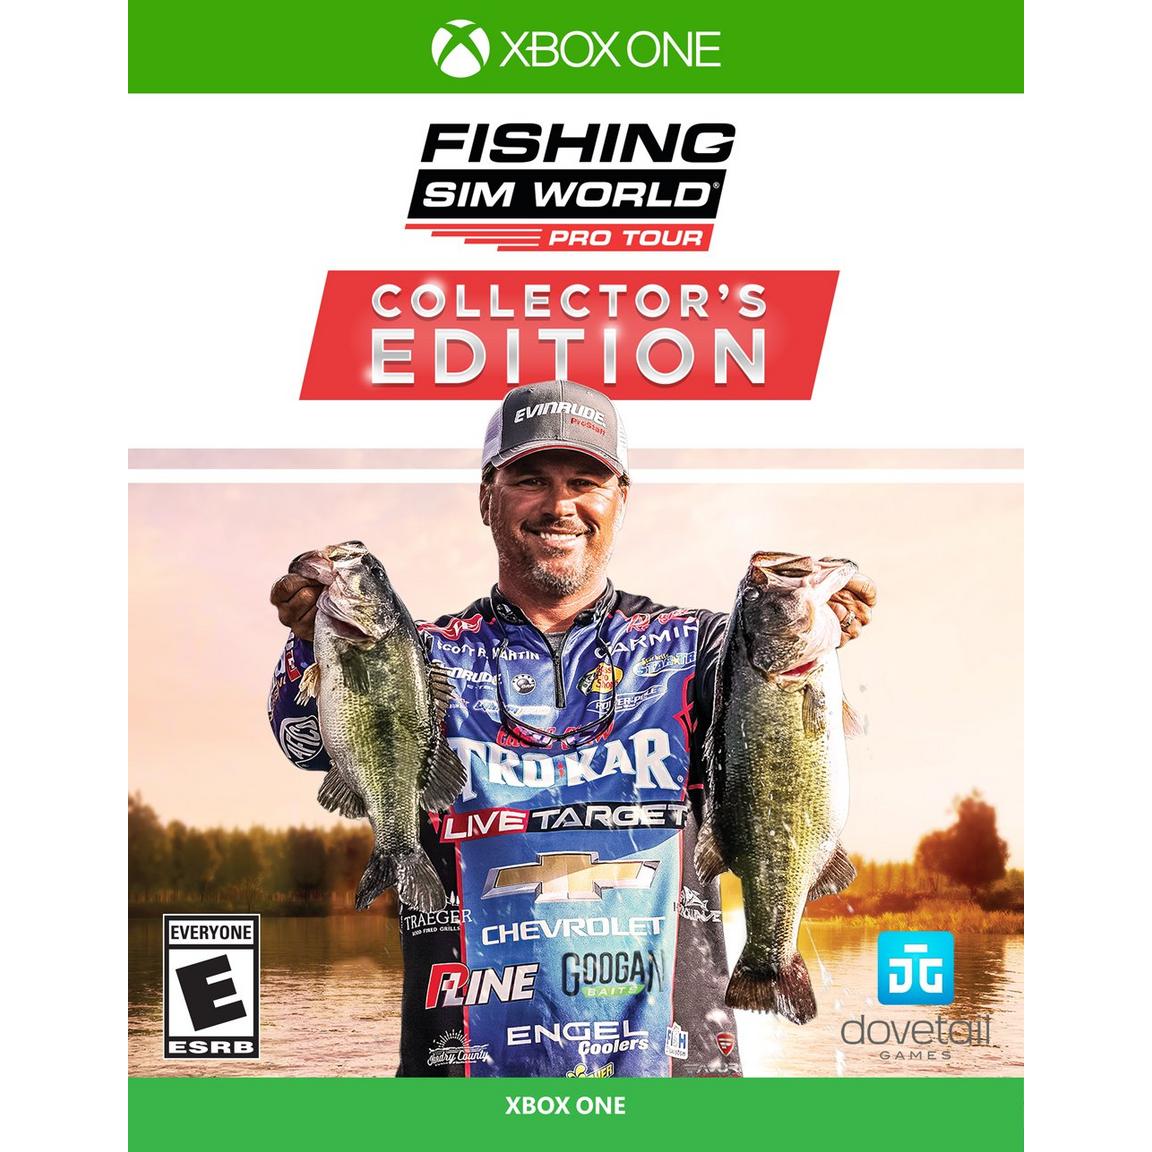 Fishing Sim World: Pro Tour Collector's Edition - Xbox One, Pre-Owned